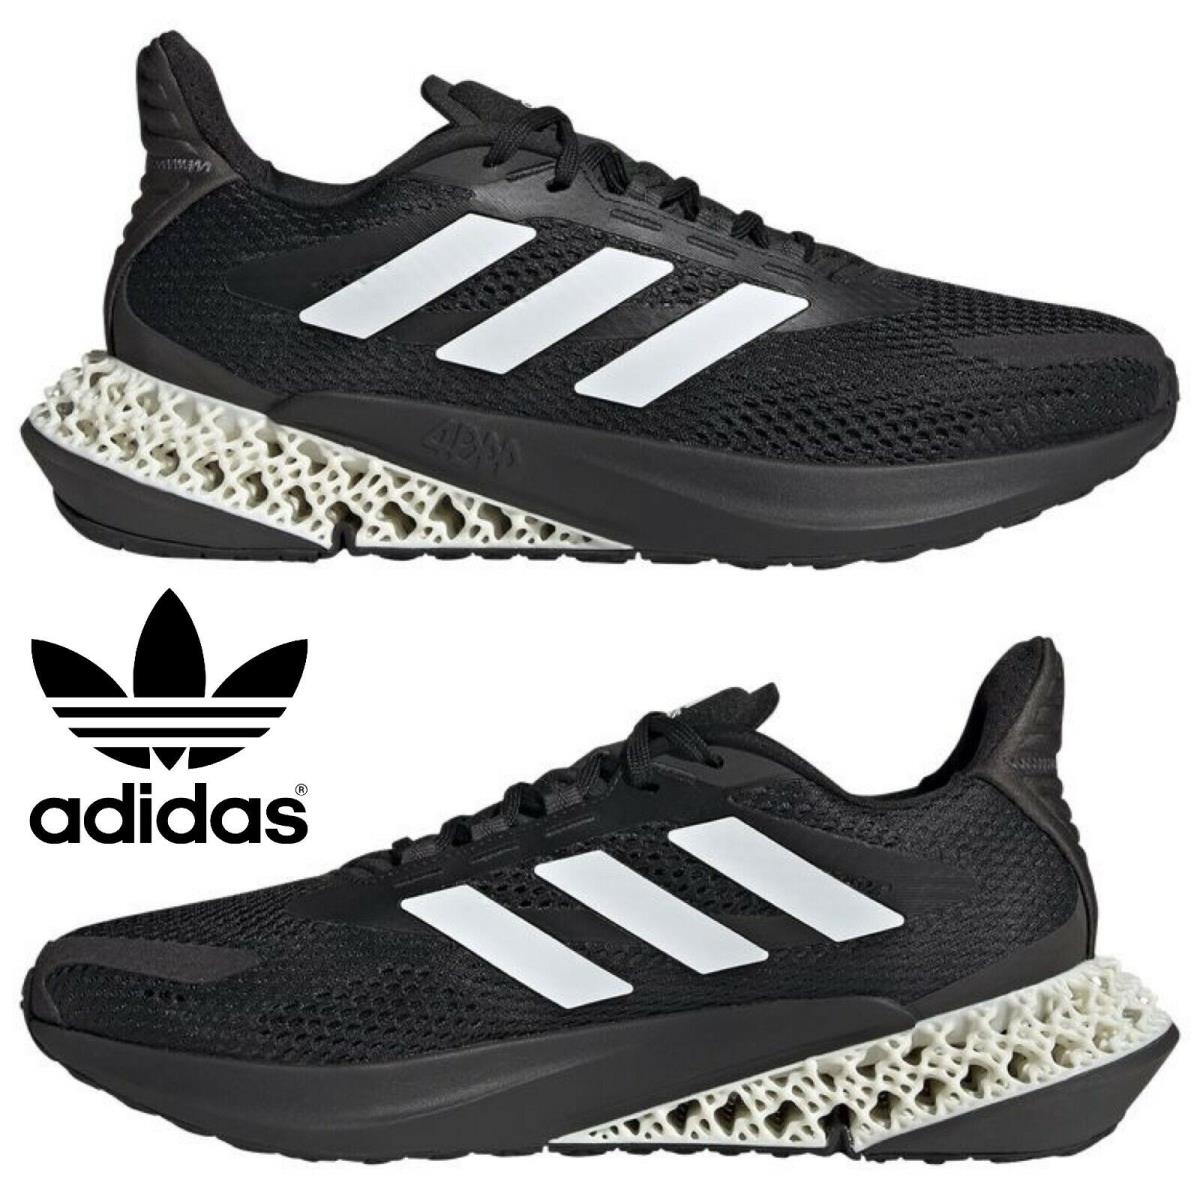 Adidas 4DFWD Kick Men`s Sneakers Running Shoes Gym Casual Comfort Sport Black